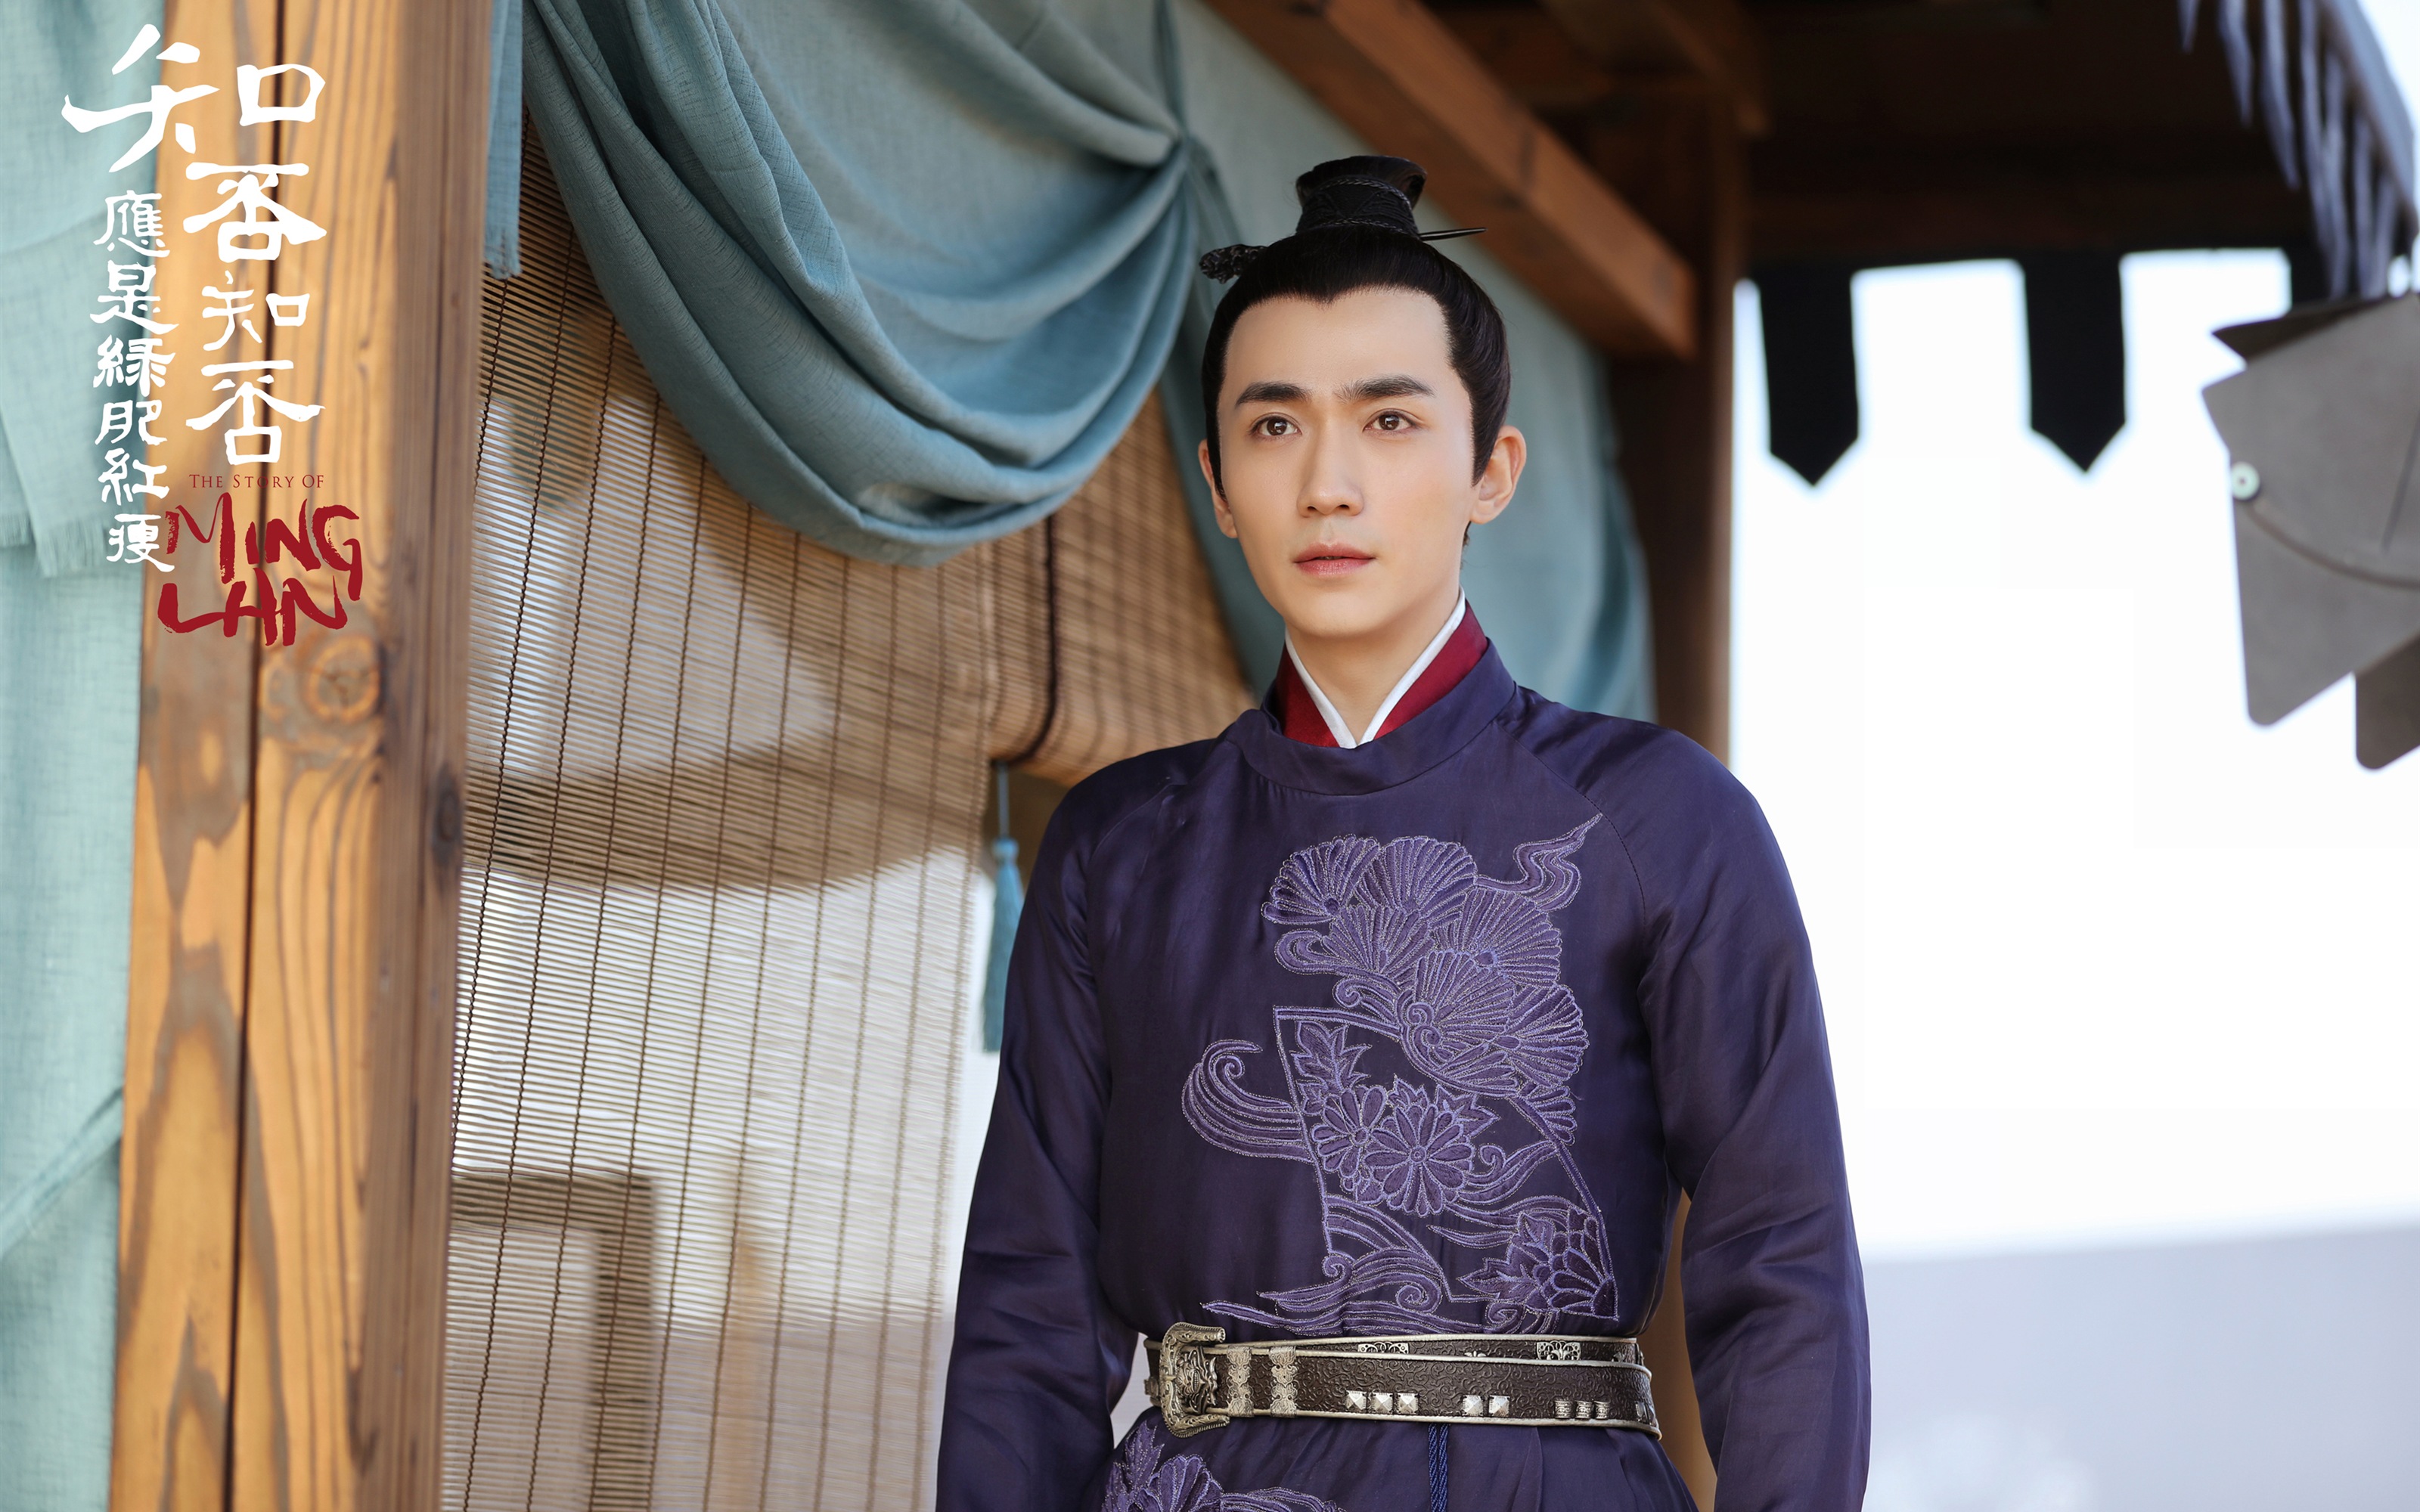 The Story Of MingLan, TV series HD wallpapers #24 - 3200x2000